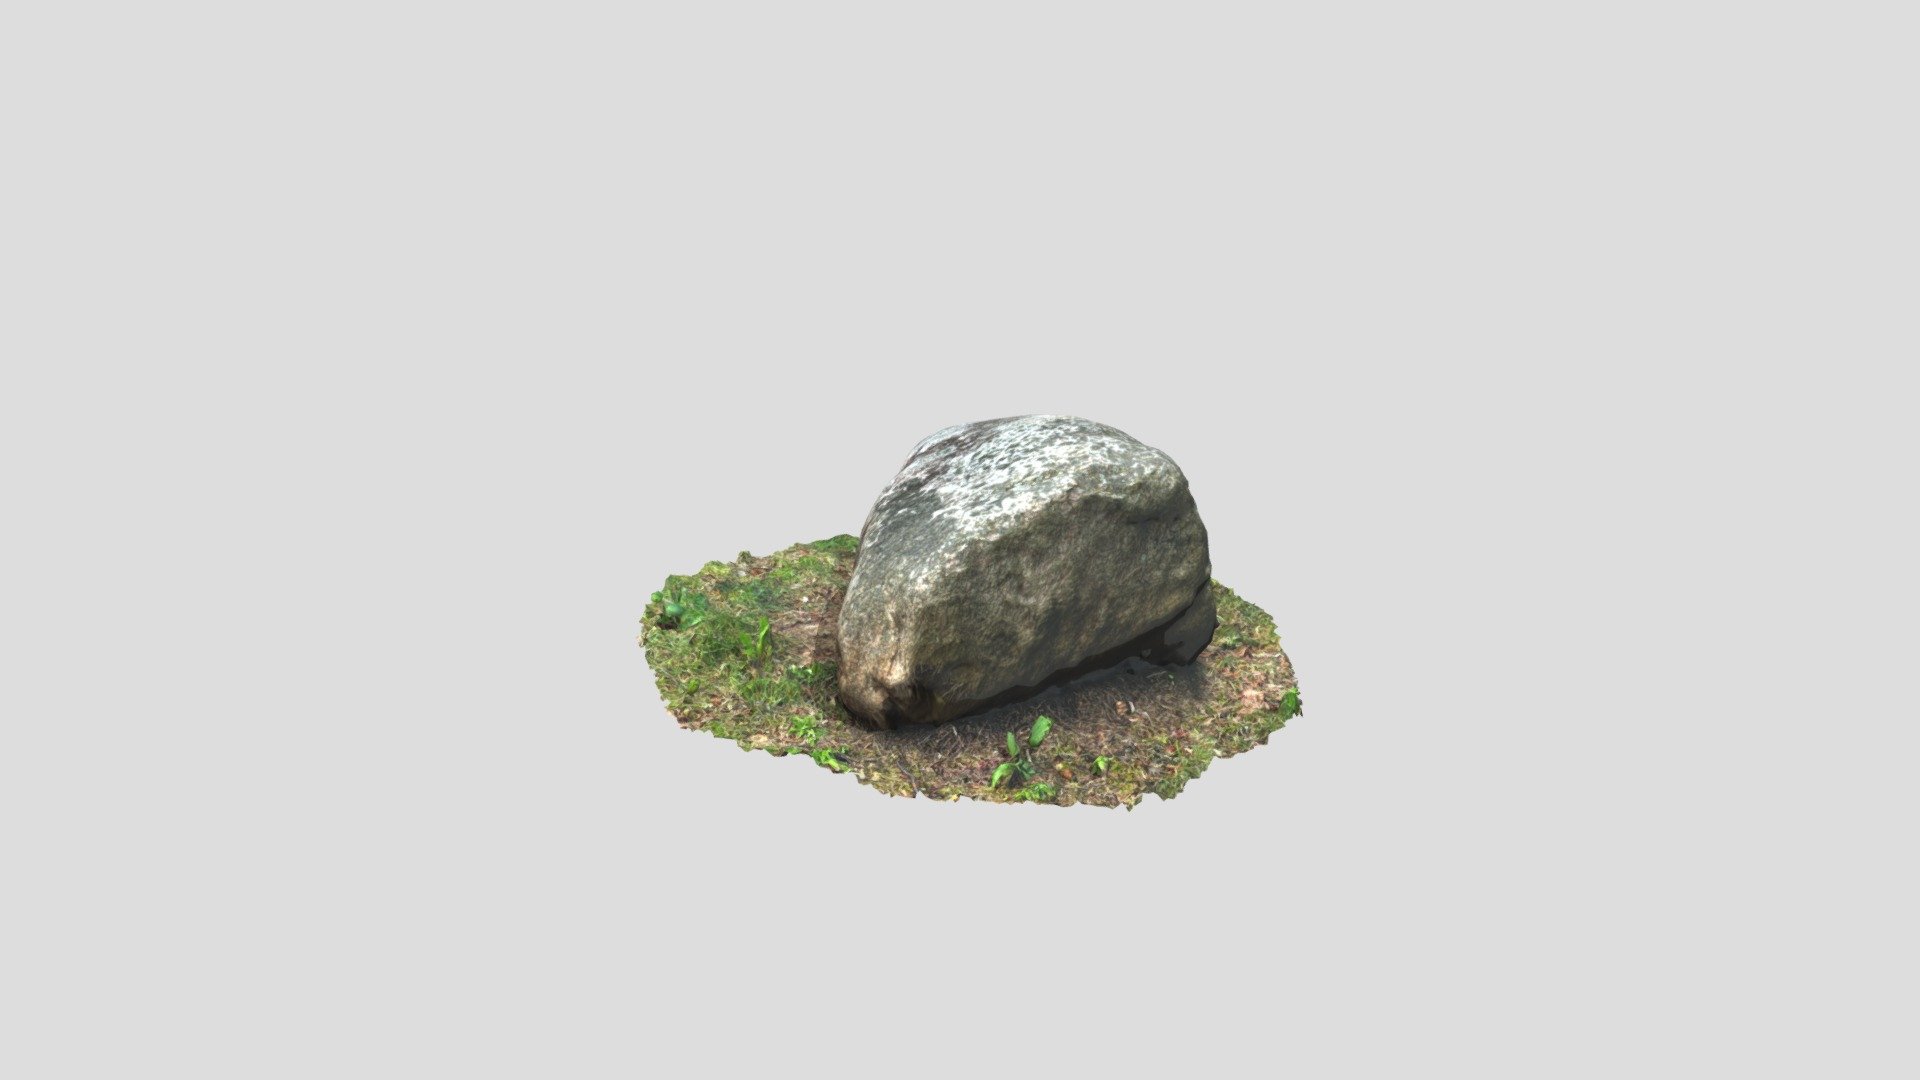 Feel free to download and use. More to come! If you like the rock, come back to my account in the future when I have more stuff uploaded 3d model